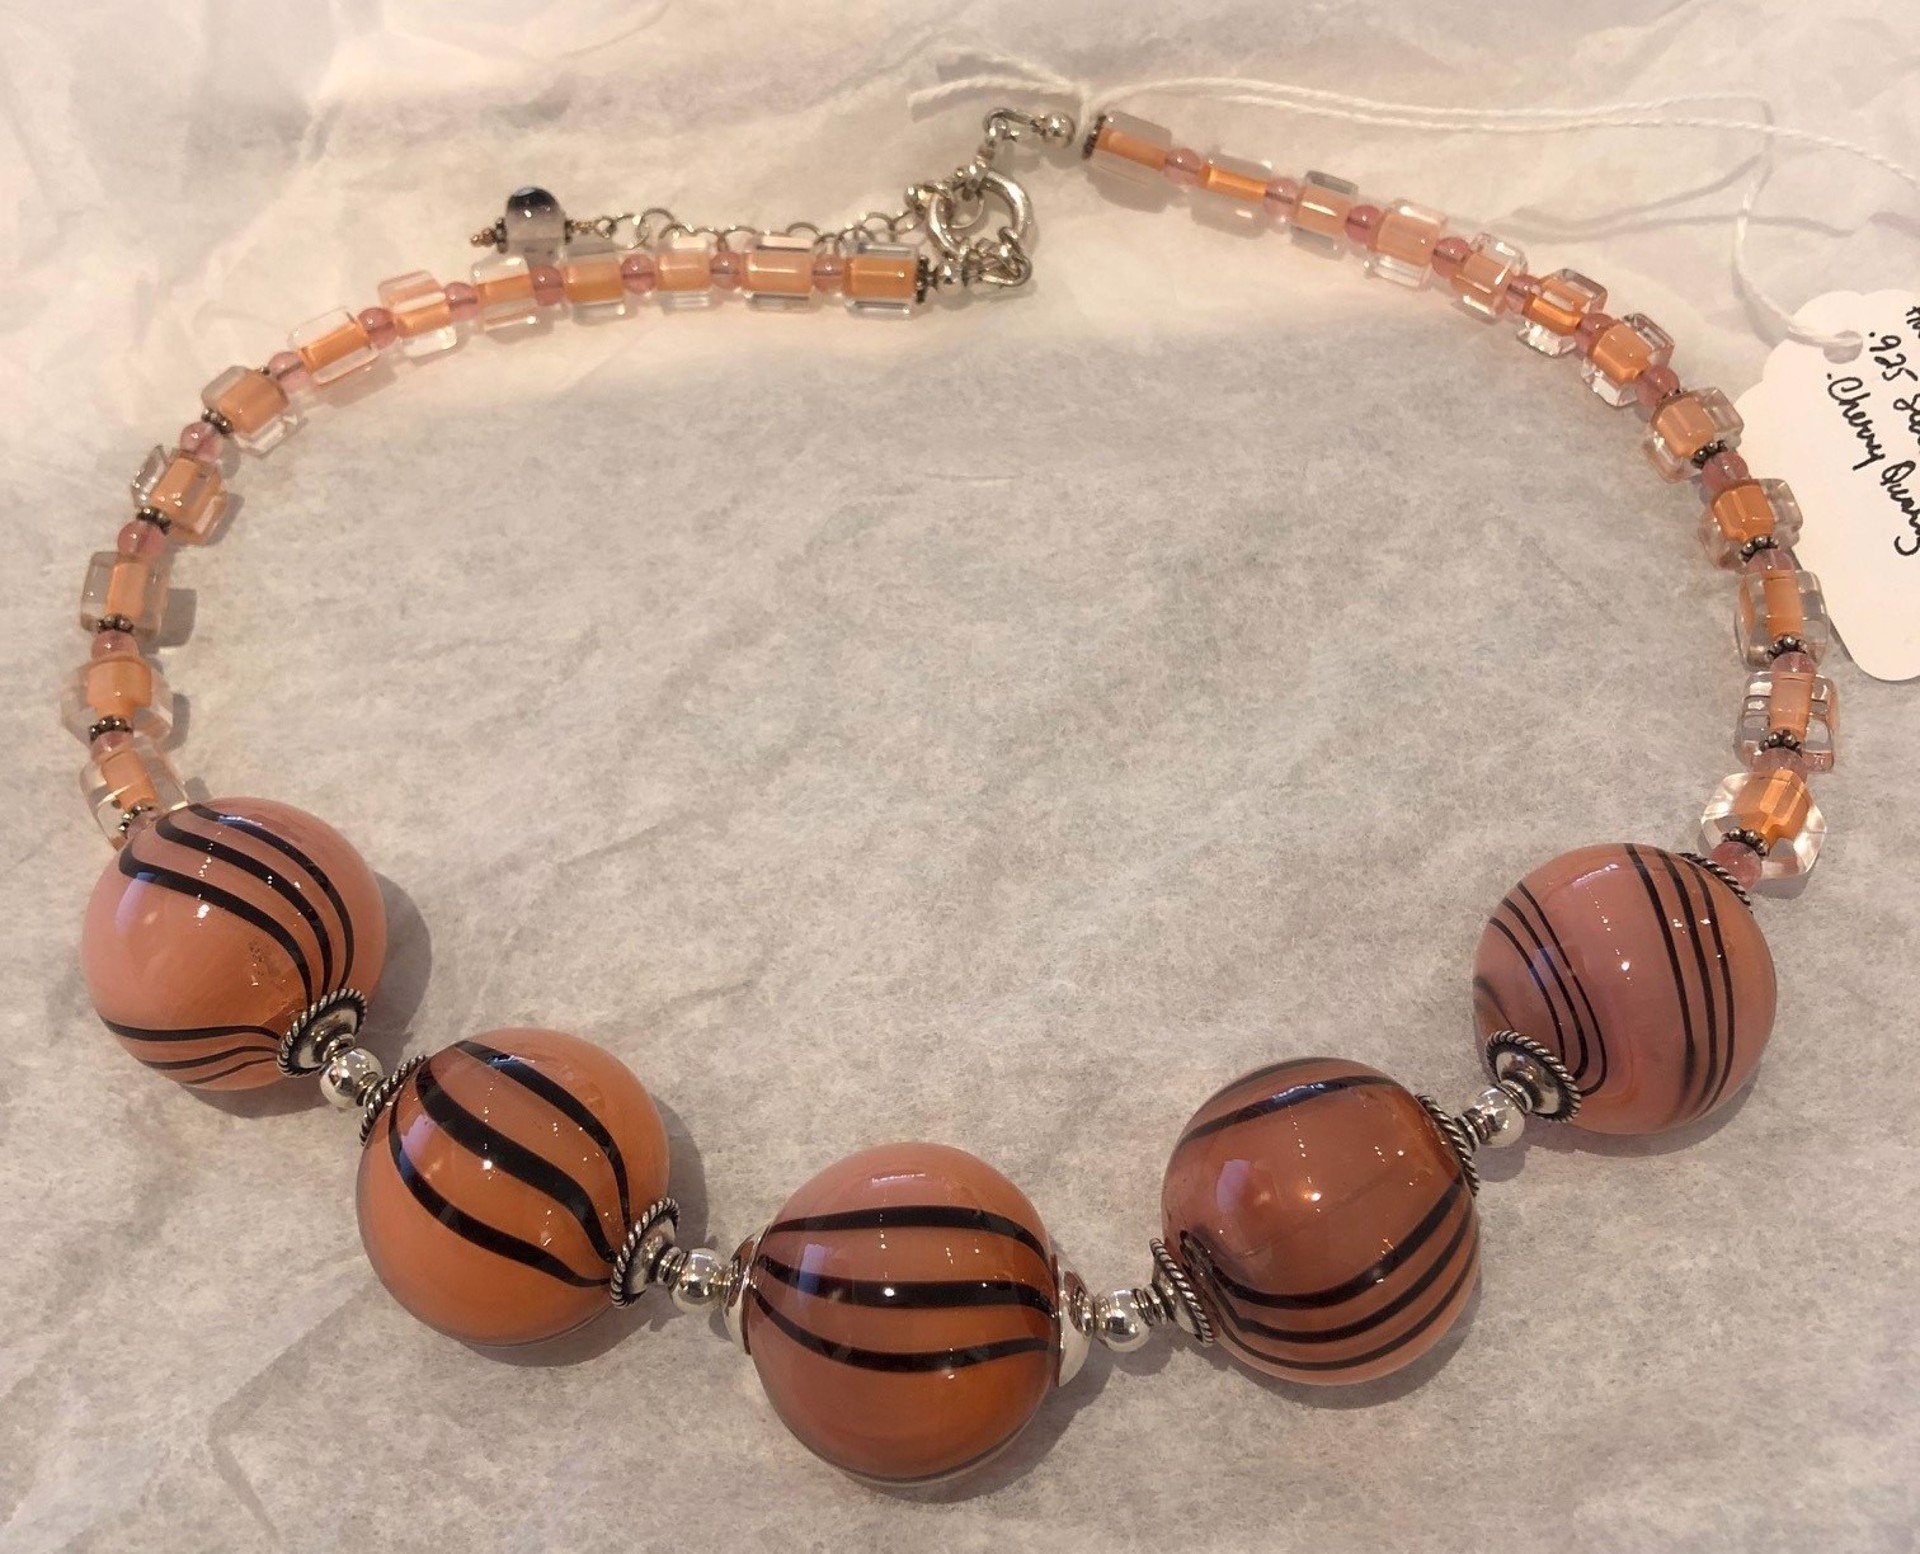 Necklace Blown Bead - 203079 by Virginia Wilson Toccalino